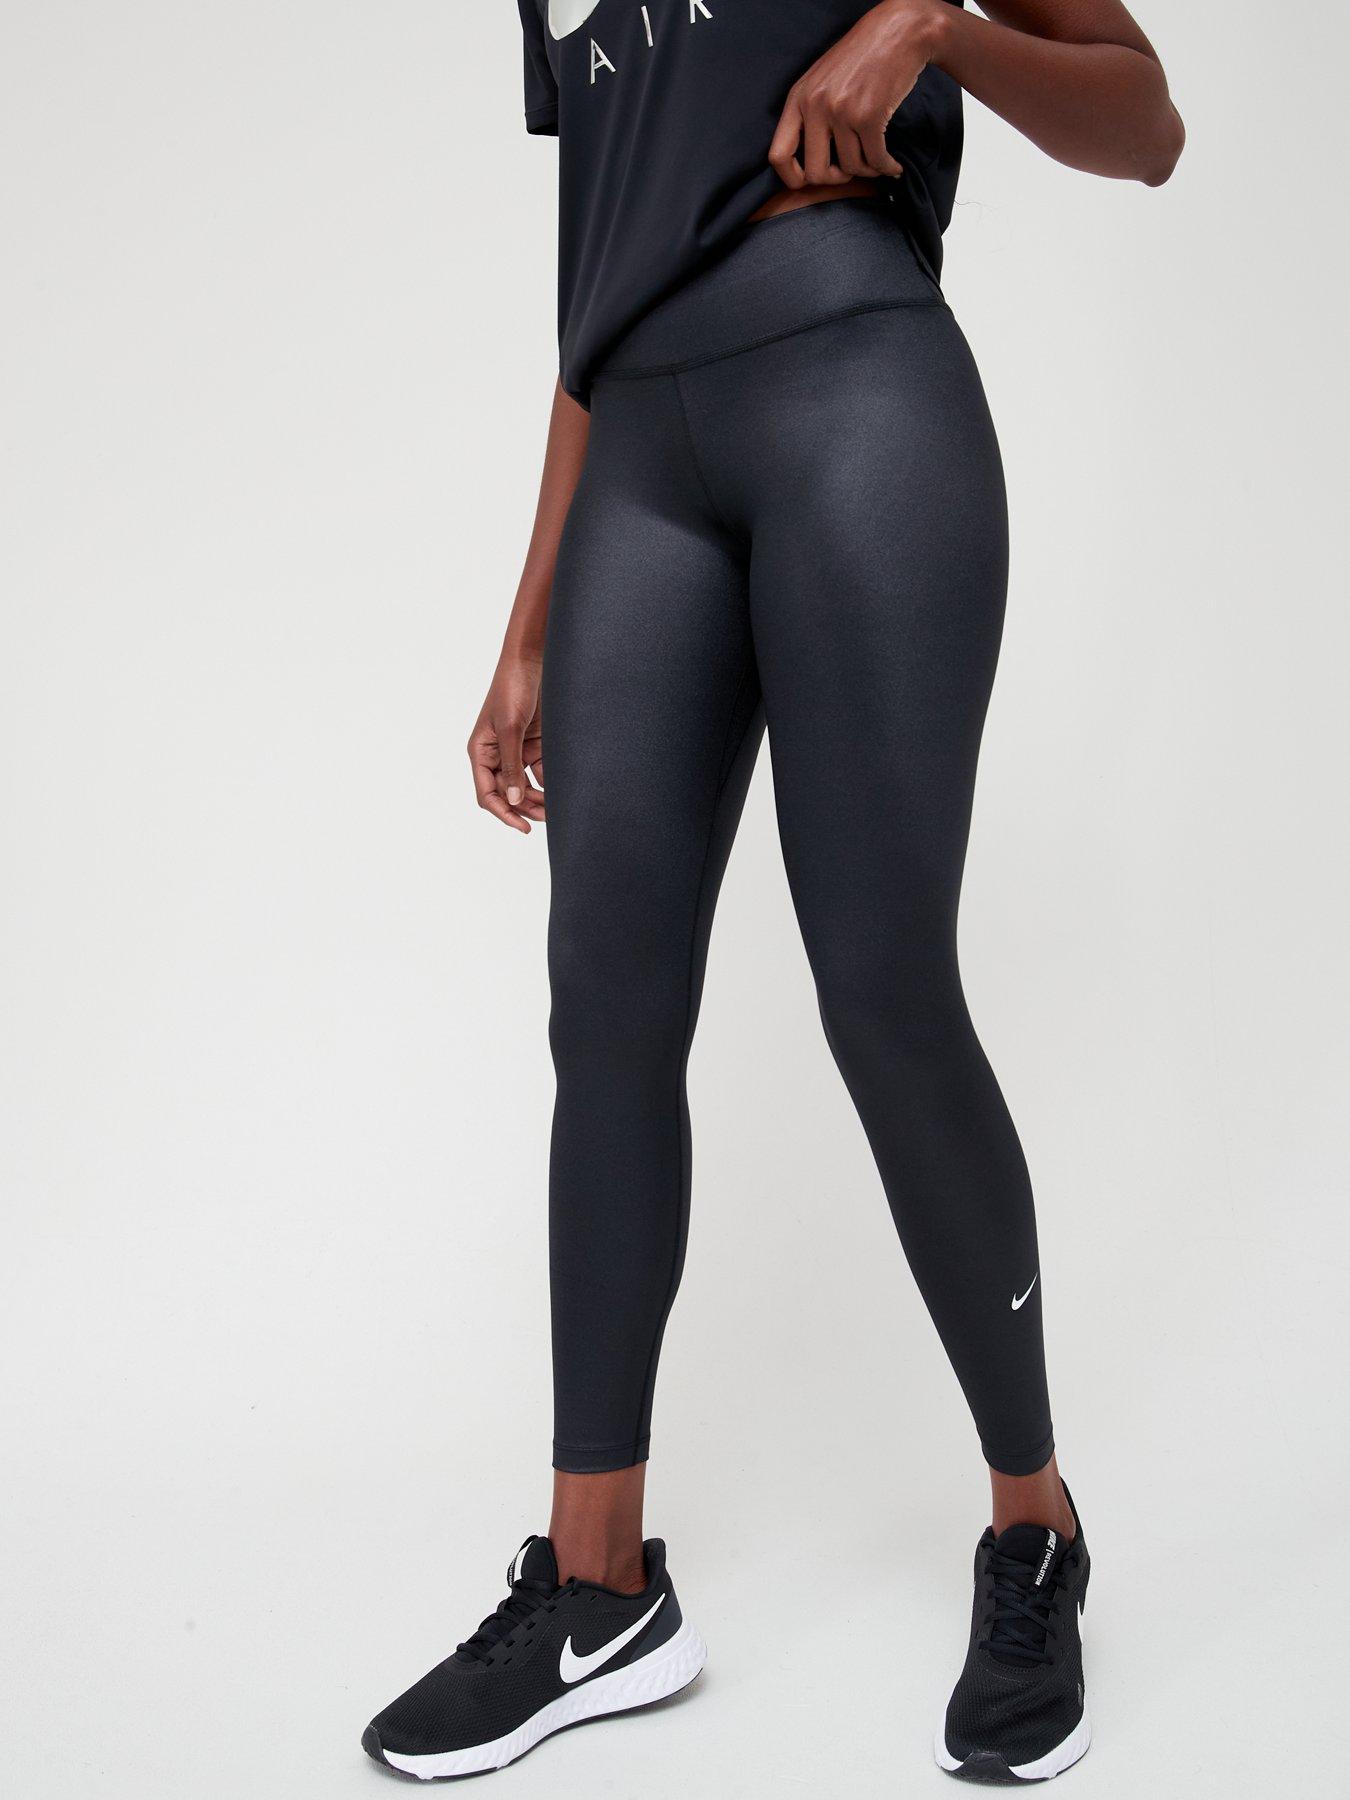 Nike, Pants & Jumpsuits, Nike Pro Leggings Small Black Compression  Workout Athletic Light Stretch Stay Up